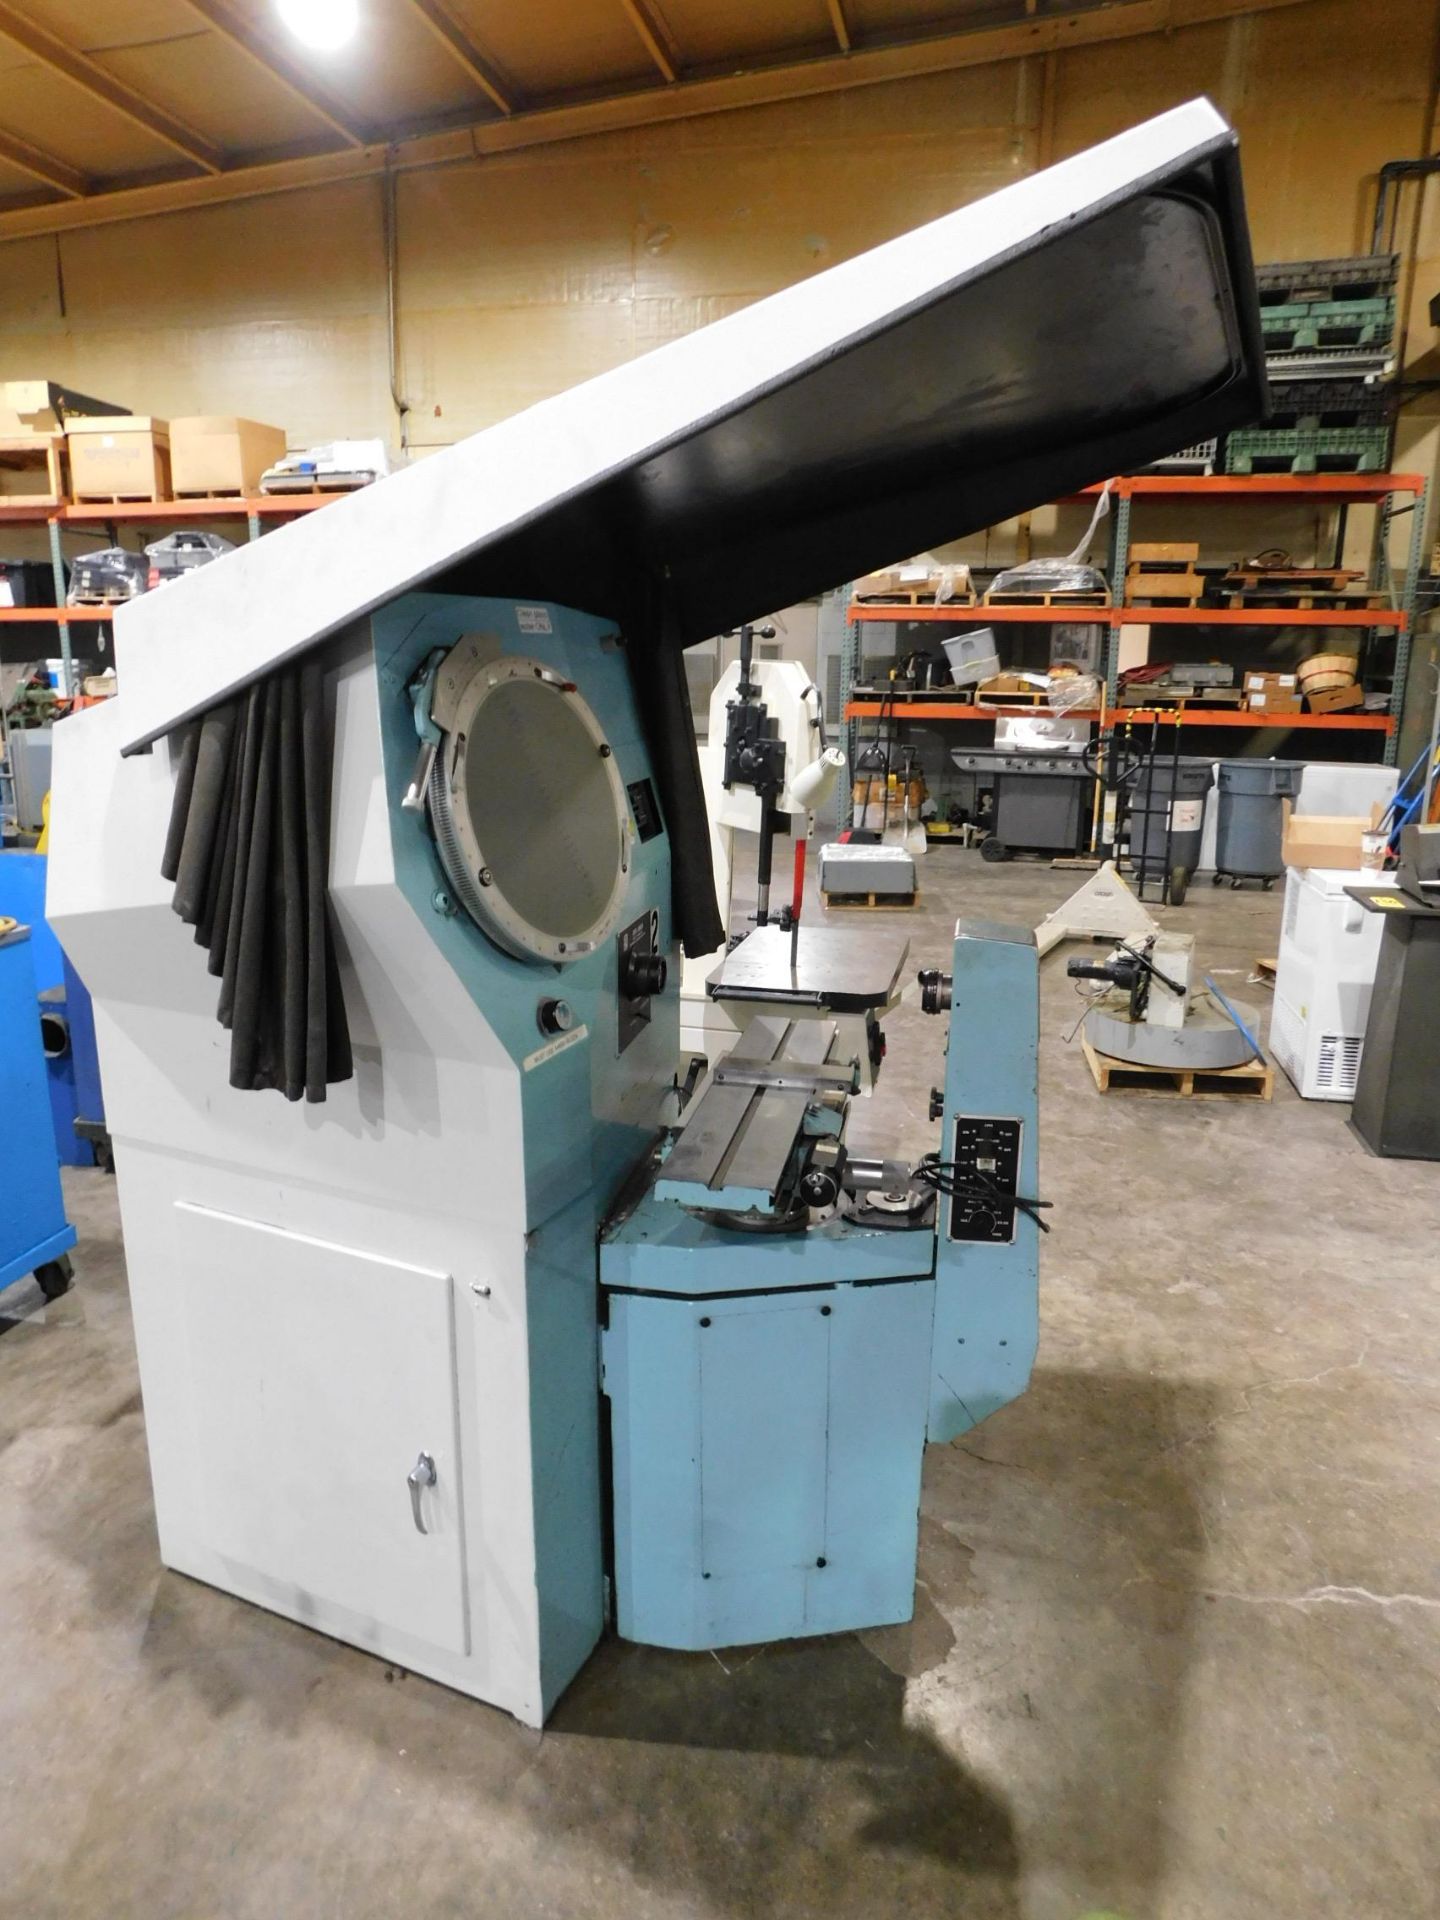 Jones & Lamson Epic 114 Optical Comparator, 14", s/n E62385, with 10X, 20X, 31.25X, 50X, 62.5X, - Image 6 of 9